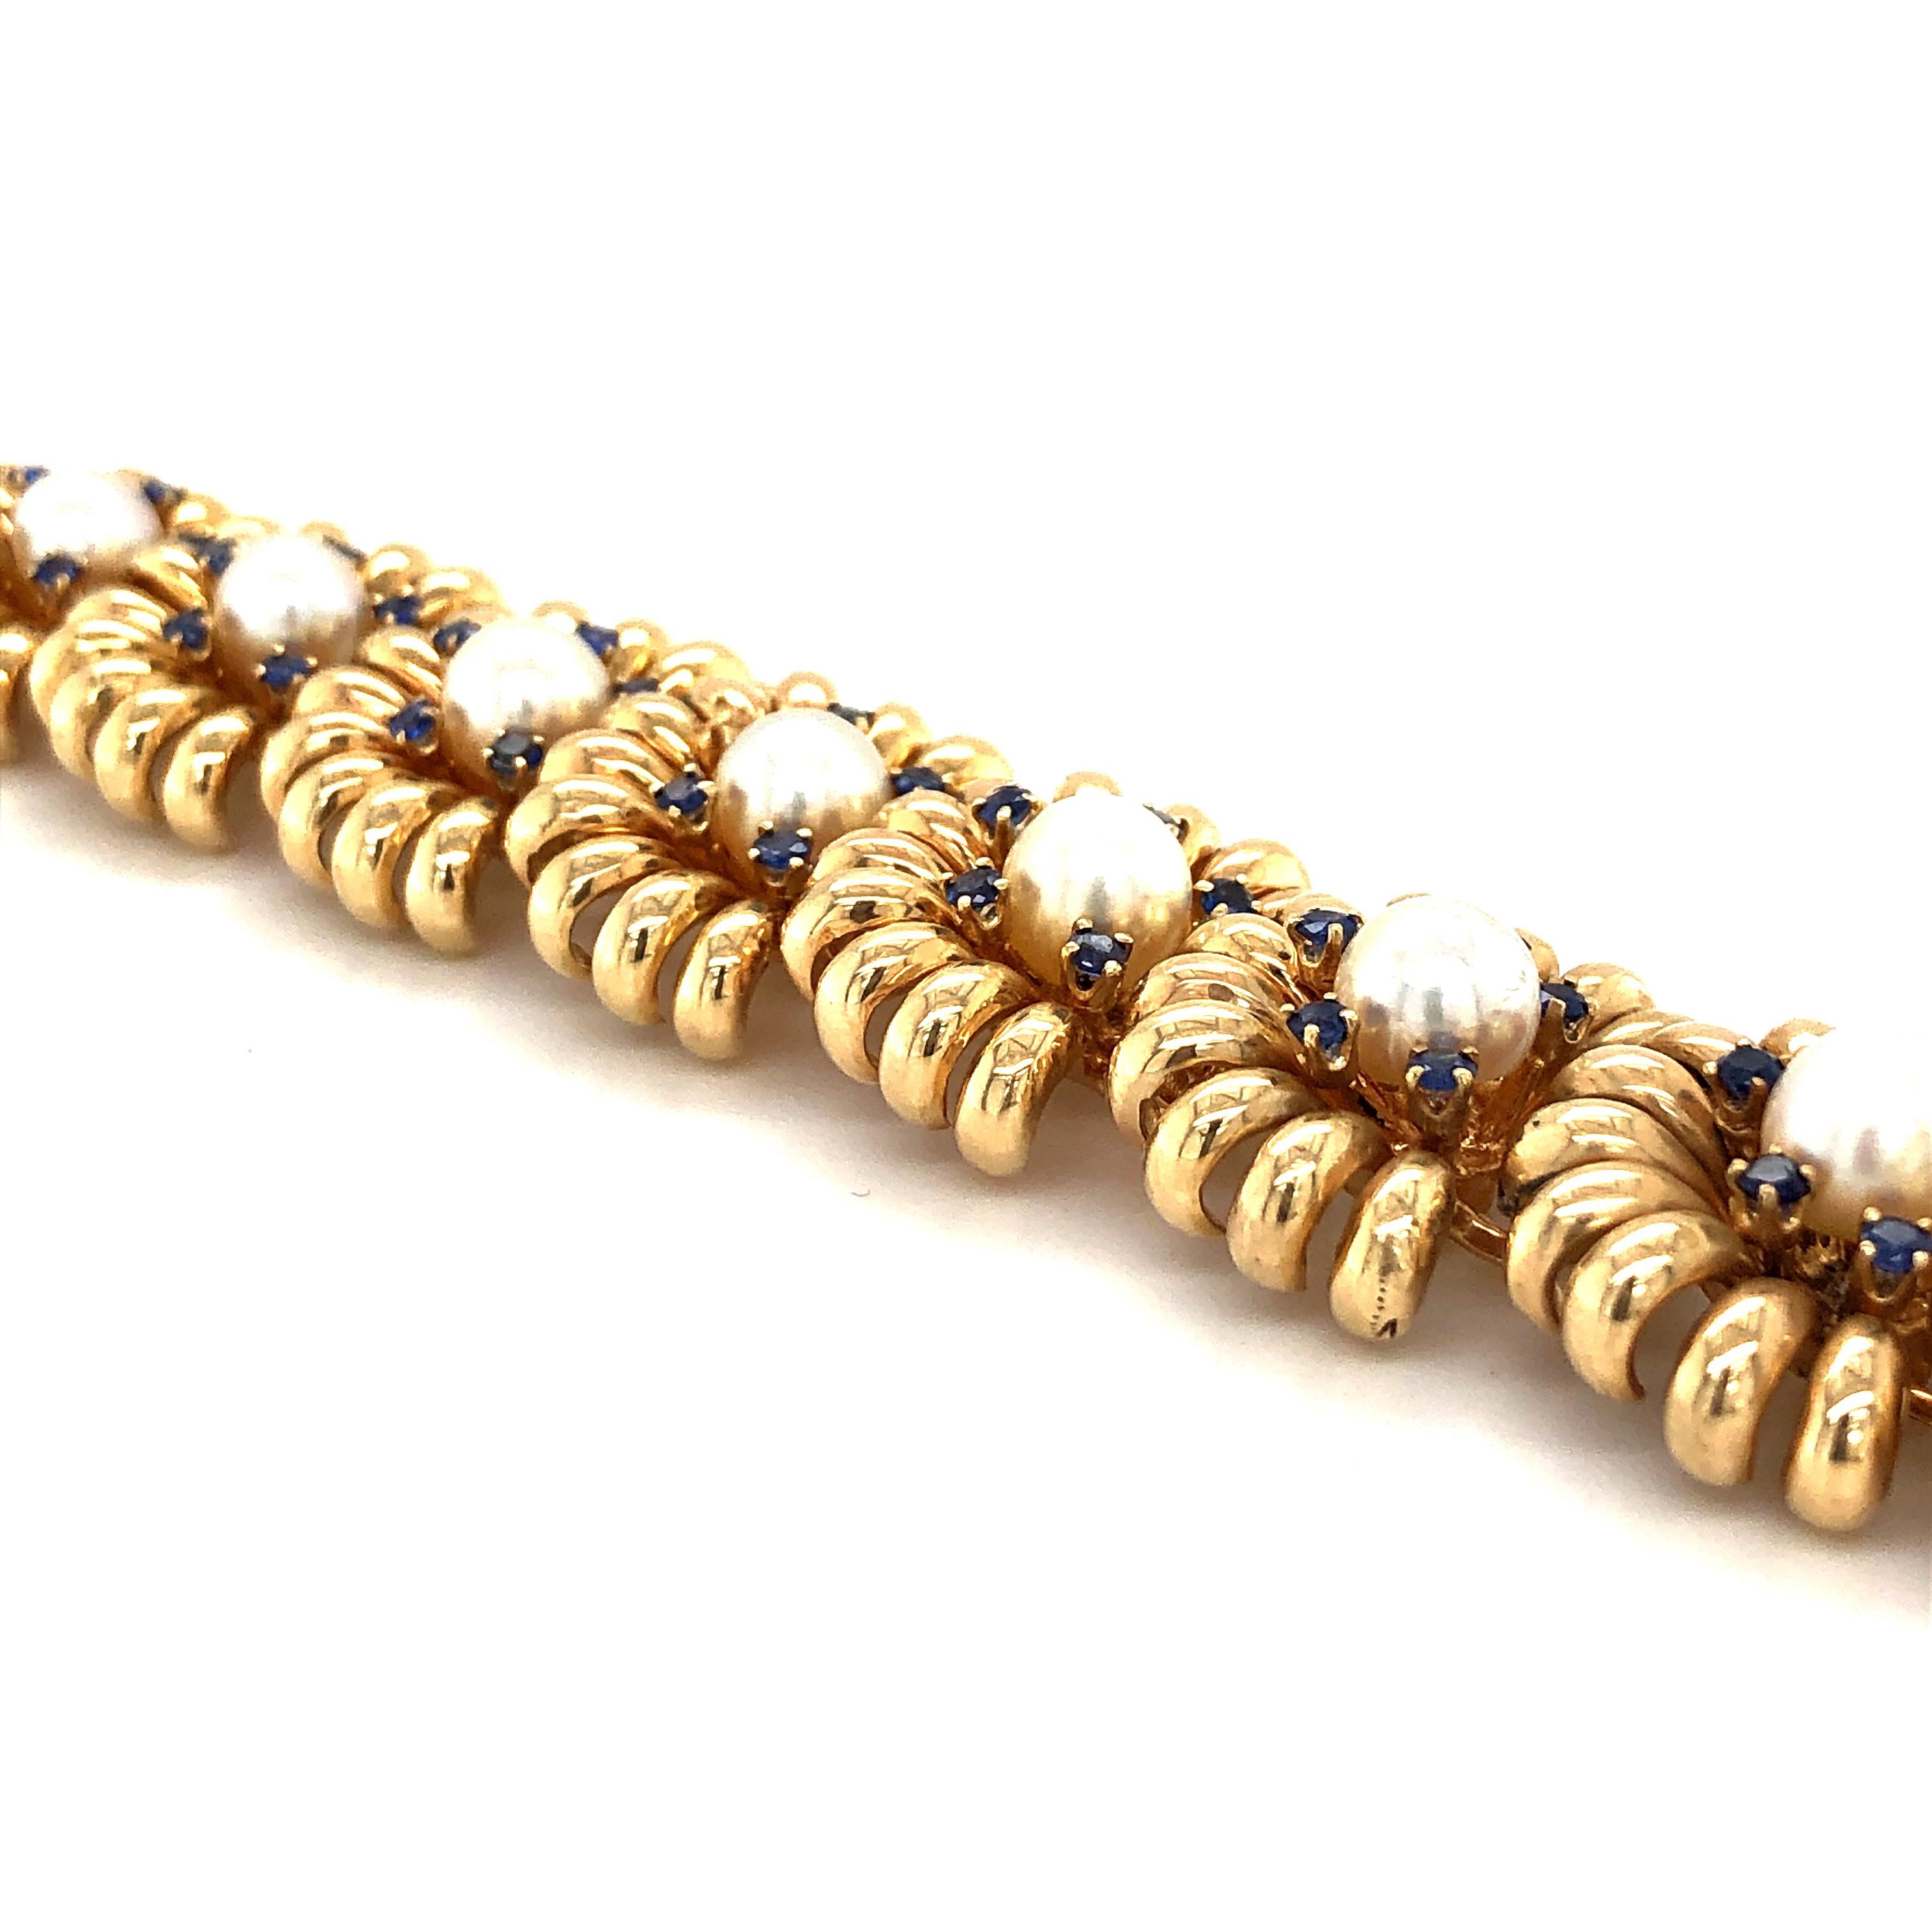 Brilliant Cut Funky 1960s Retro Akoya Pearl and Sapphire Bracelet in Gold